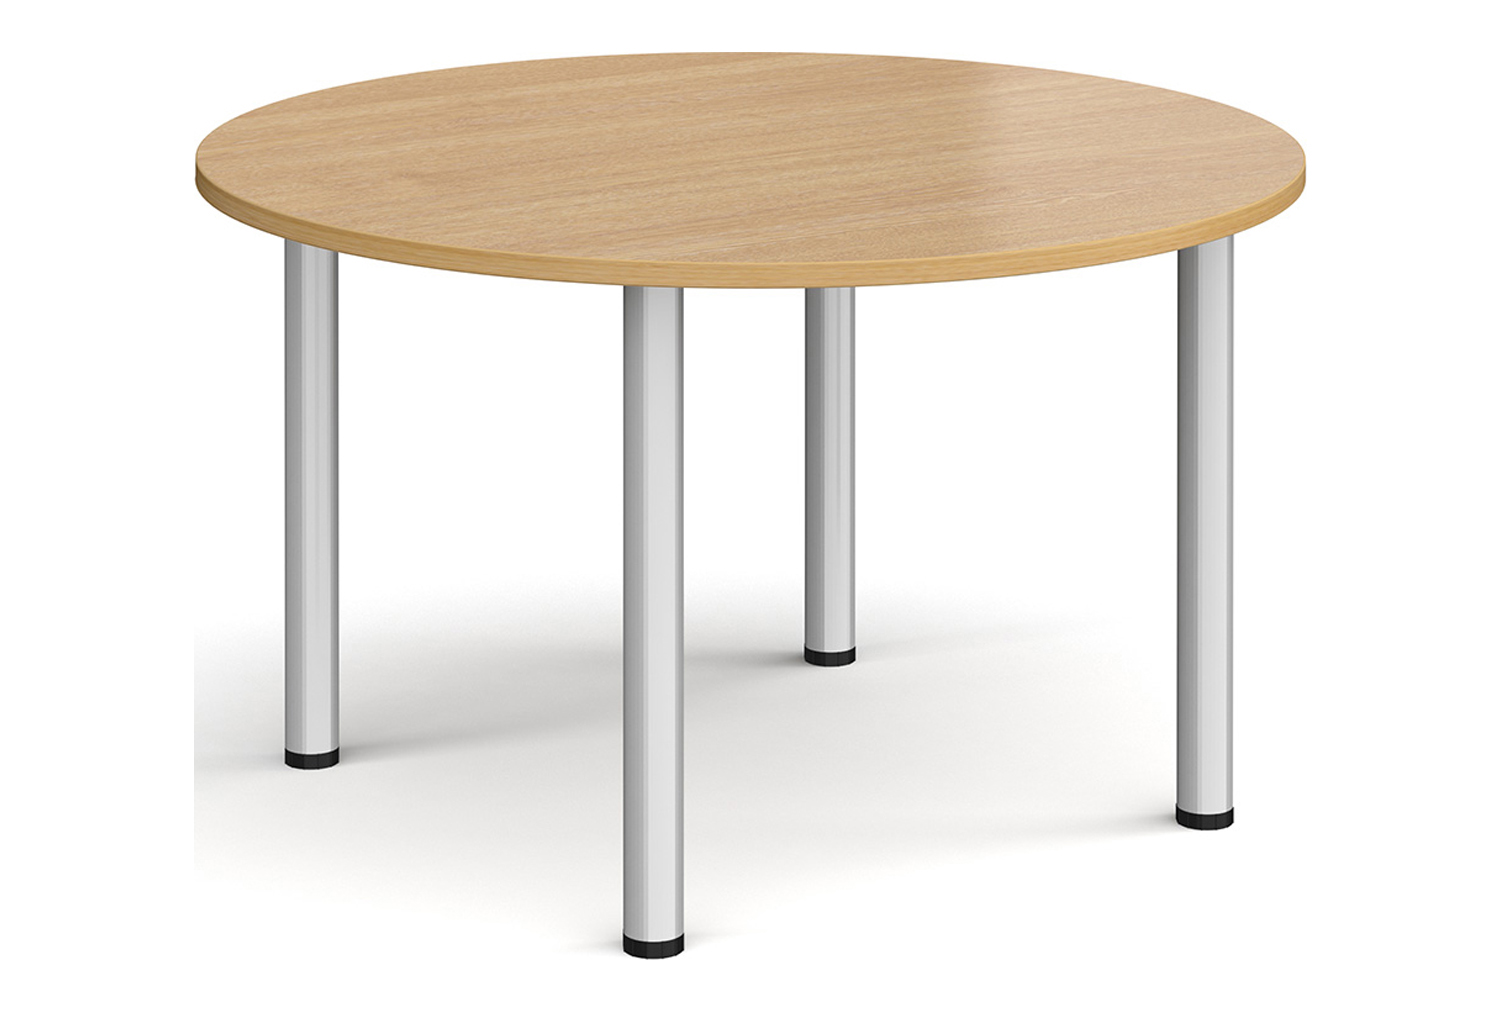 Bowers Round Meeting Table, 120diax73h (cm), Oak, Fully Installed